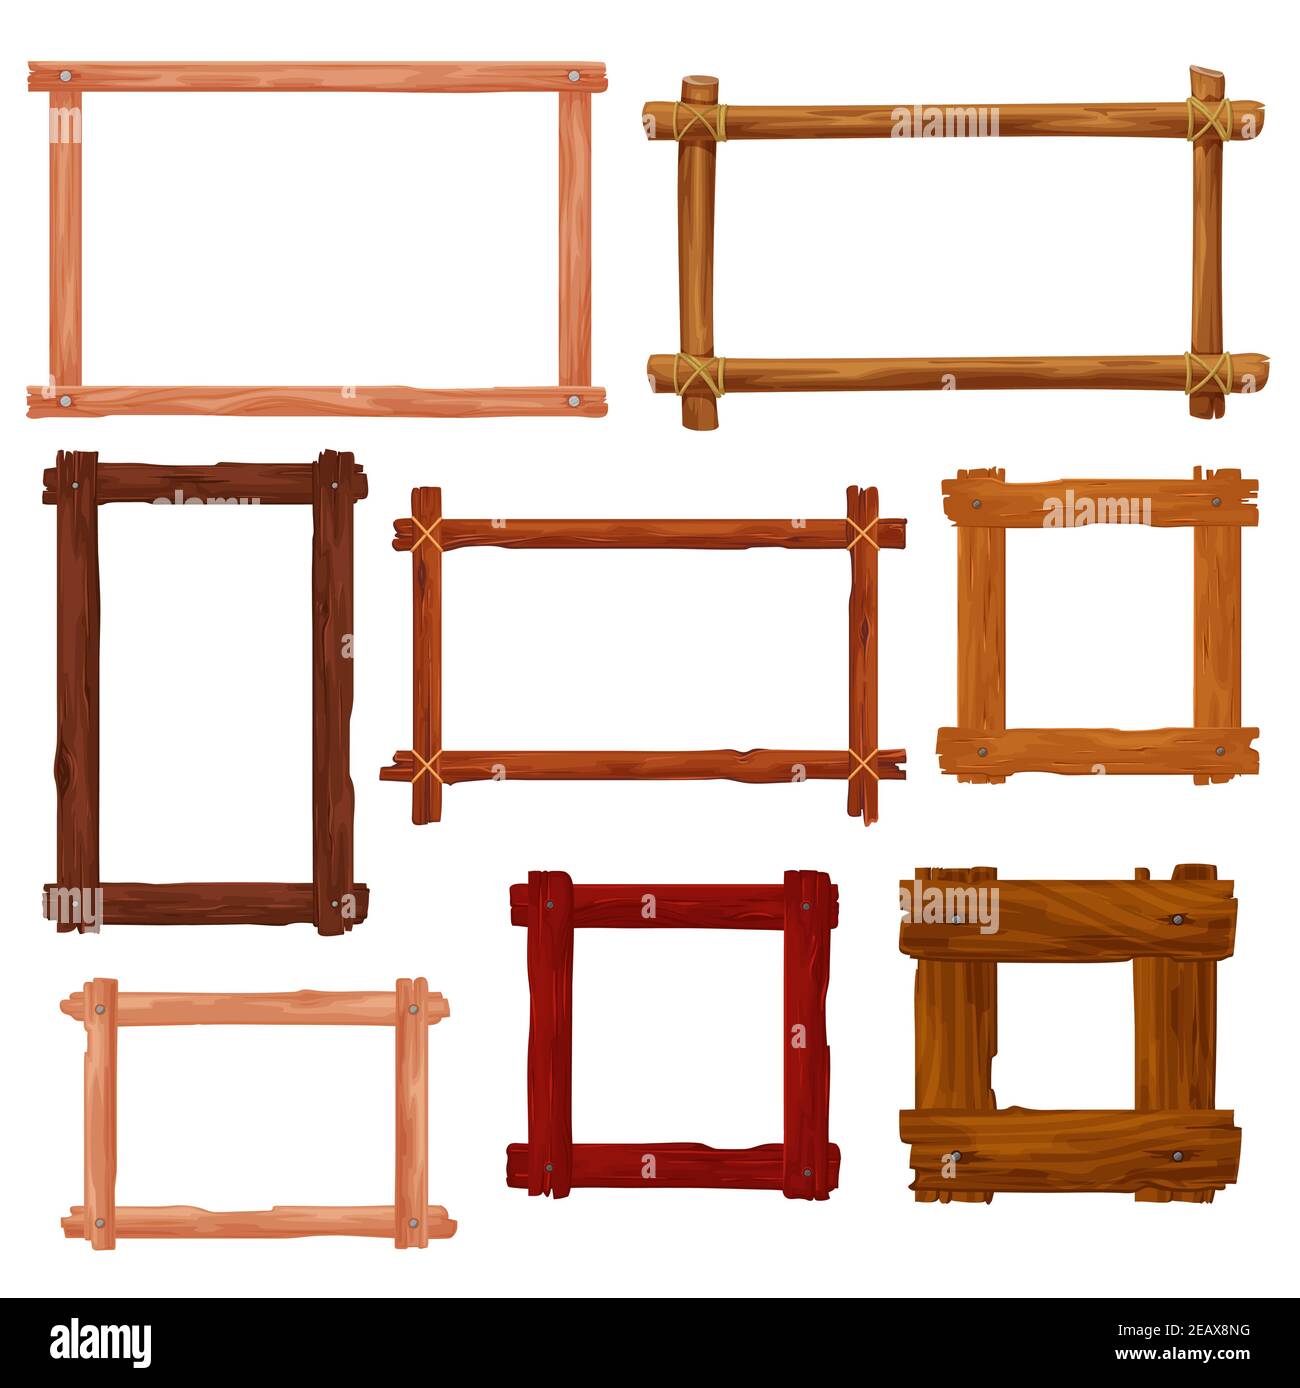 Wooden frames and borders cartoon vector design. Brown wood boards, old planks, tree branches and twigs with ropes and nails, vintage empty frames and Stock Vector